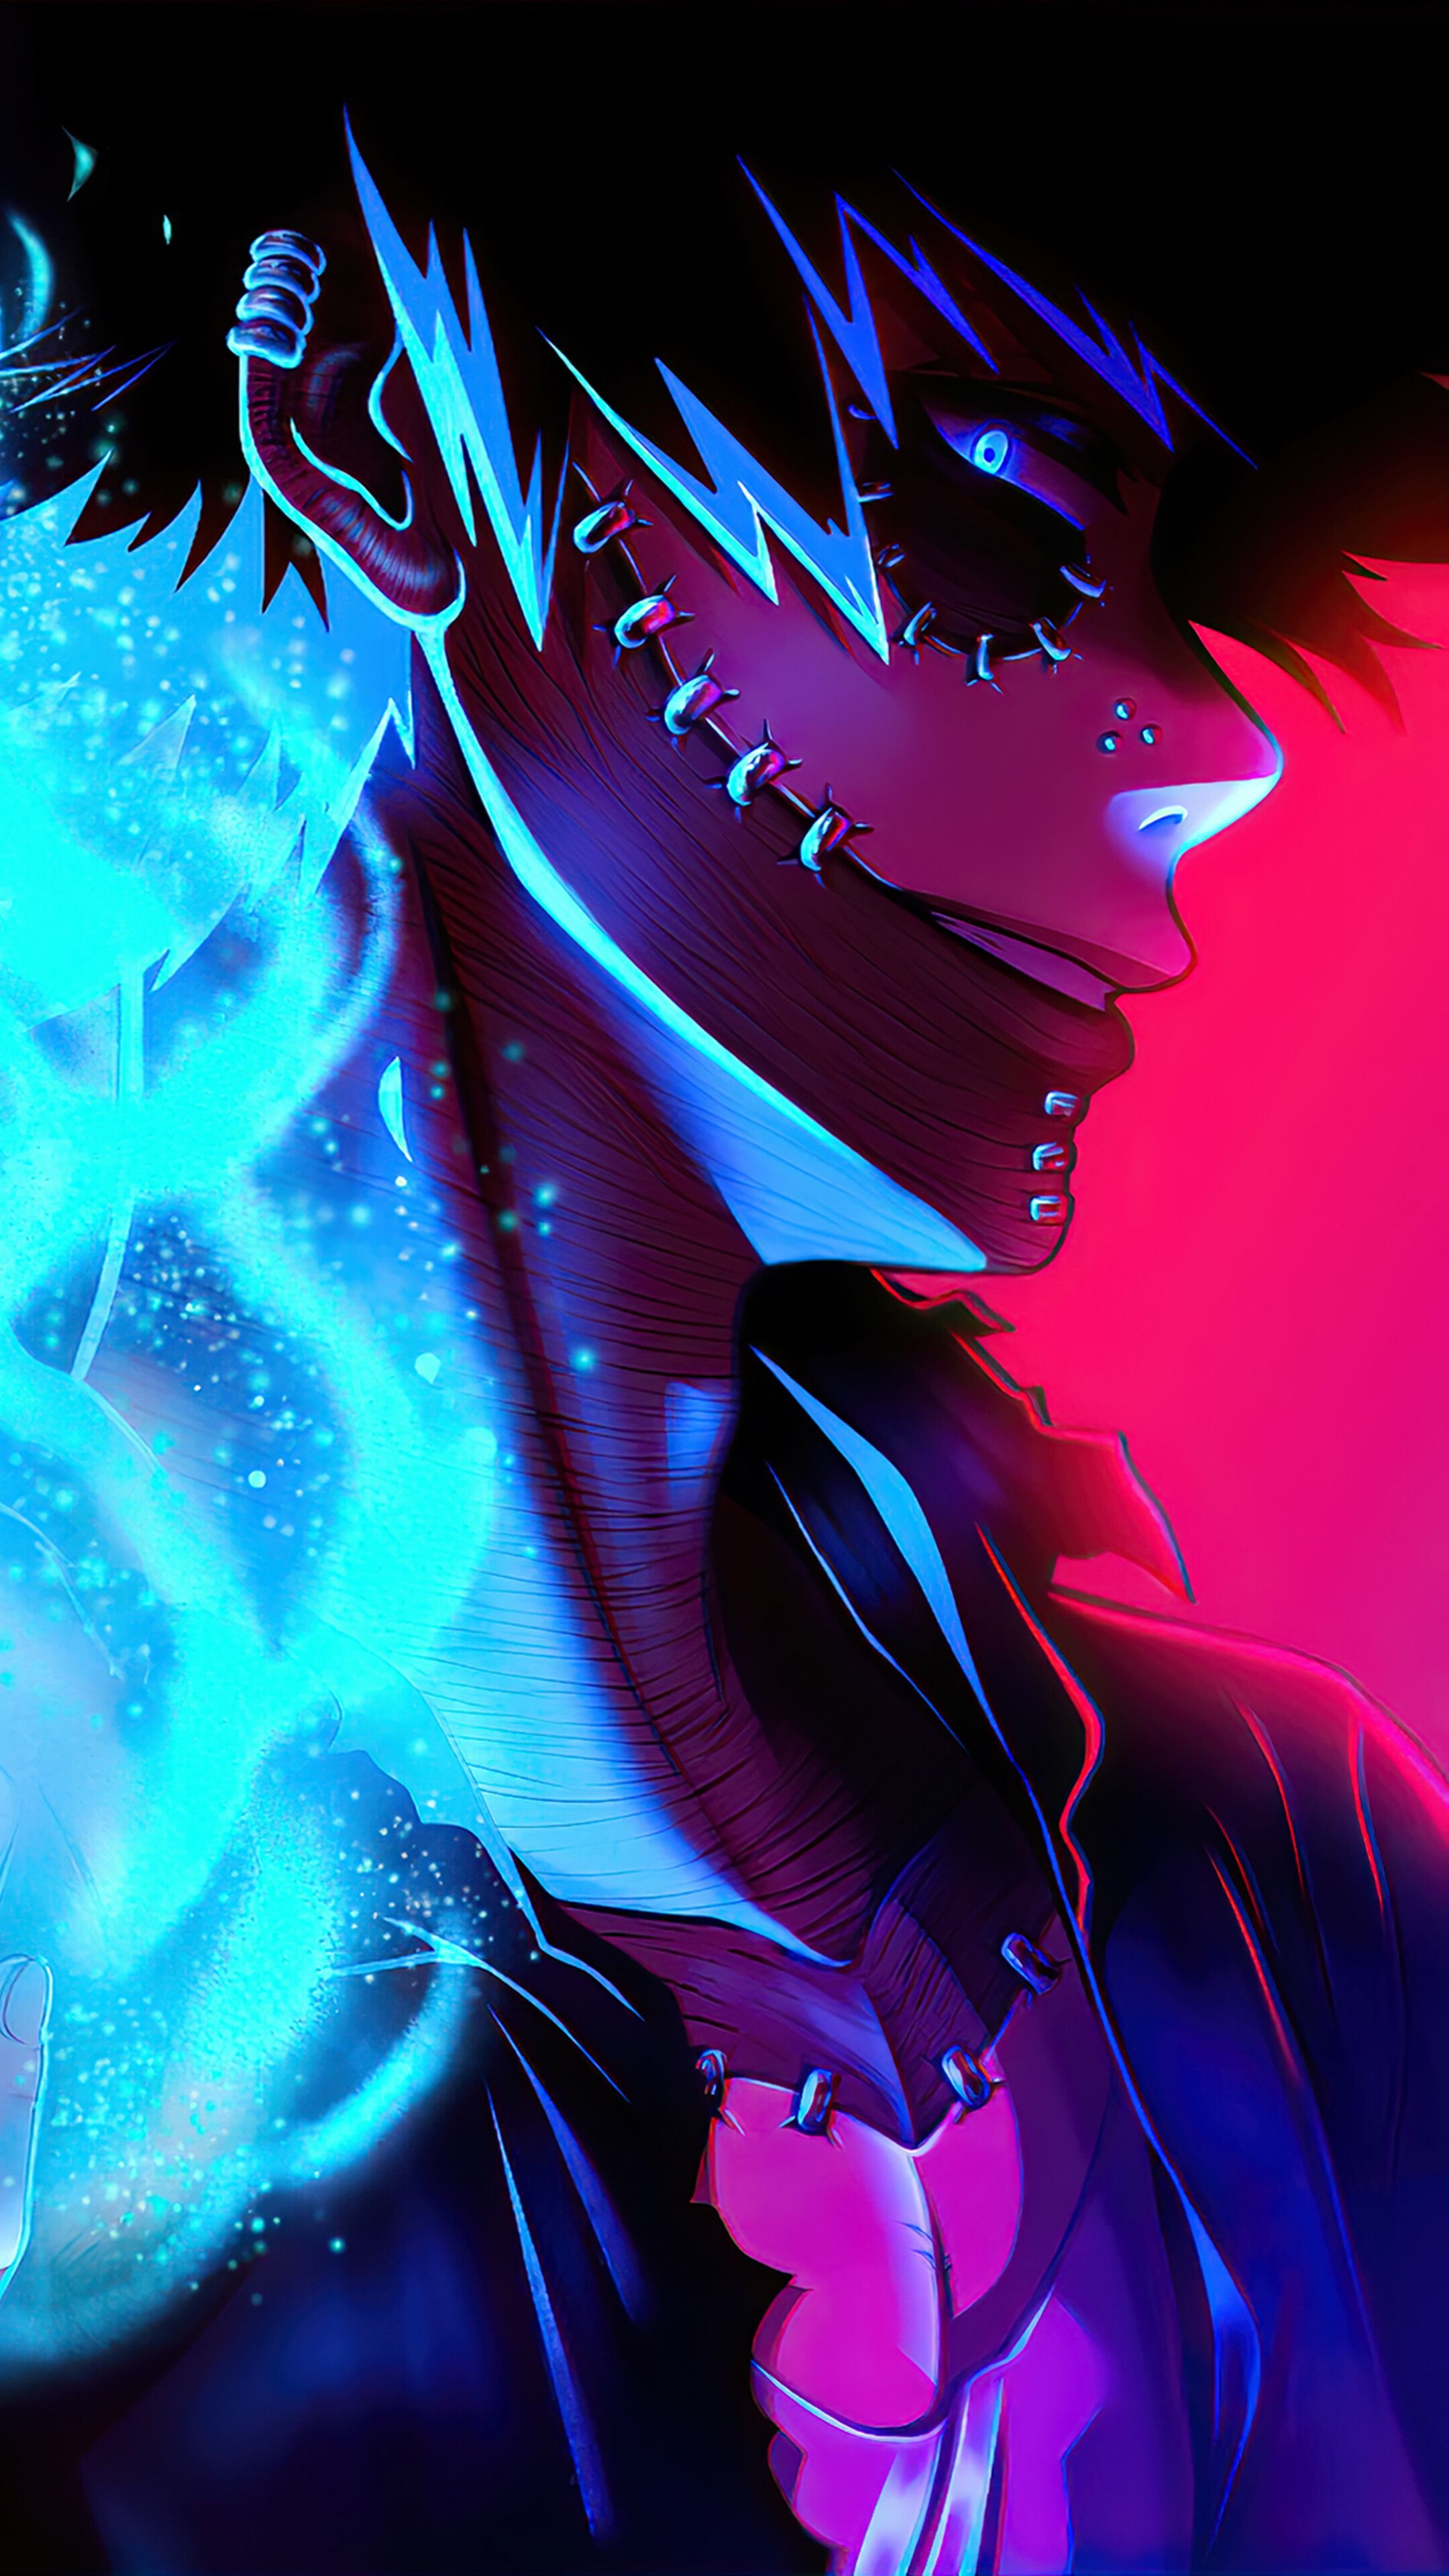 Dabi, Blue, Flame, My Hero Academia, 4K phone HD Wallpaper, Image, Background, Photo and. Personagens de anime, Wallpaper legais de anime, Desenhos de anime